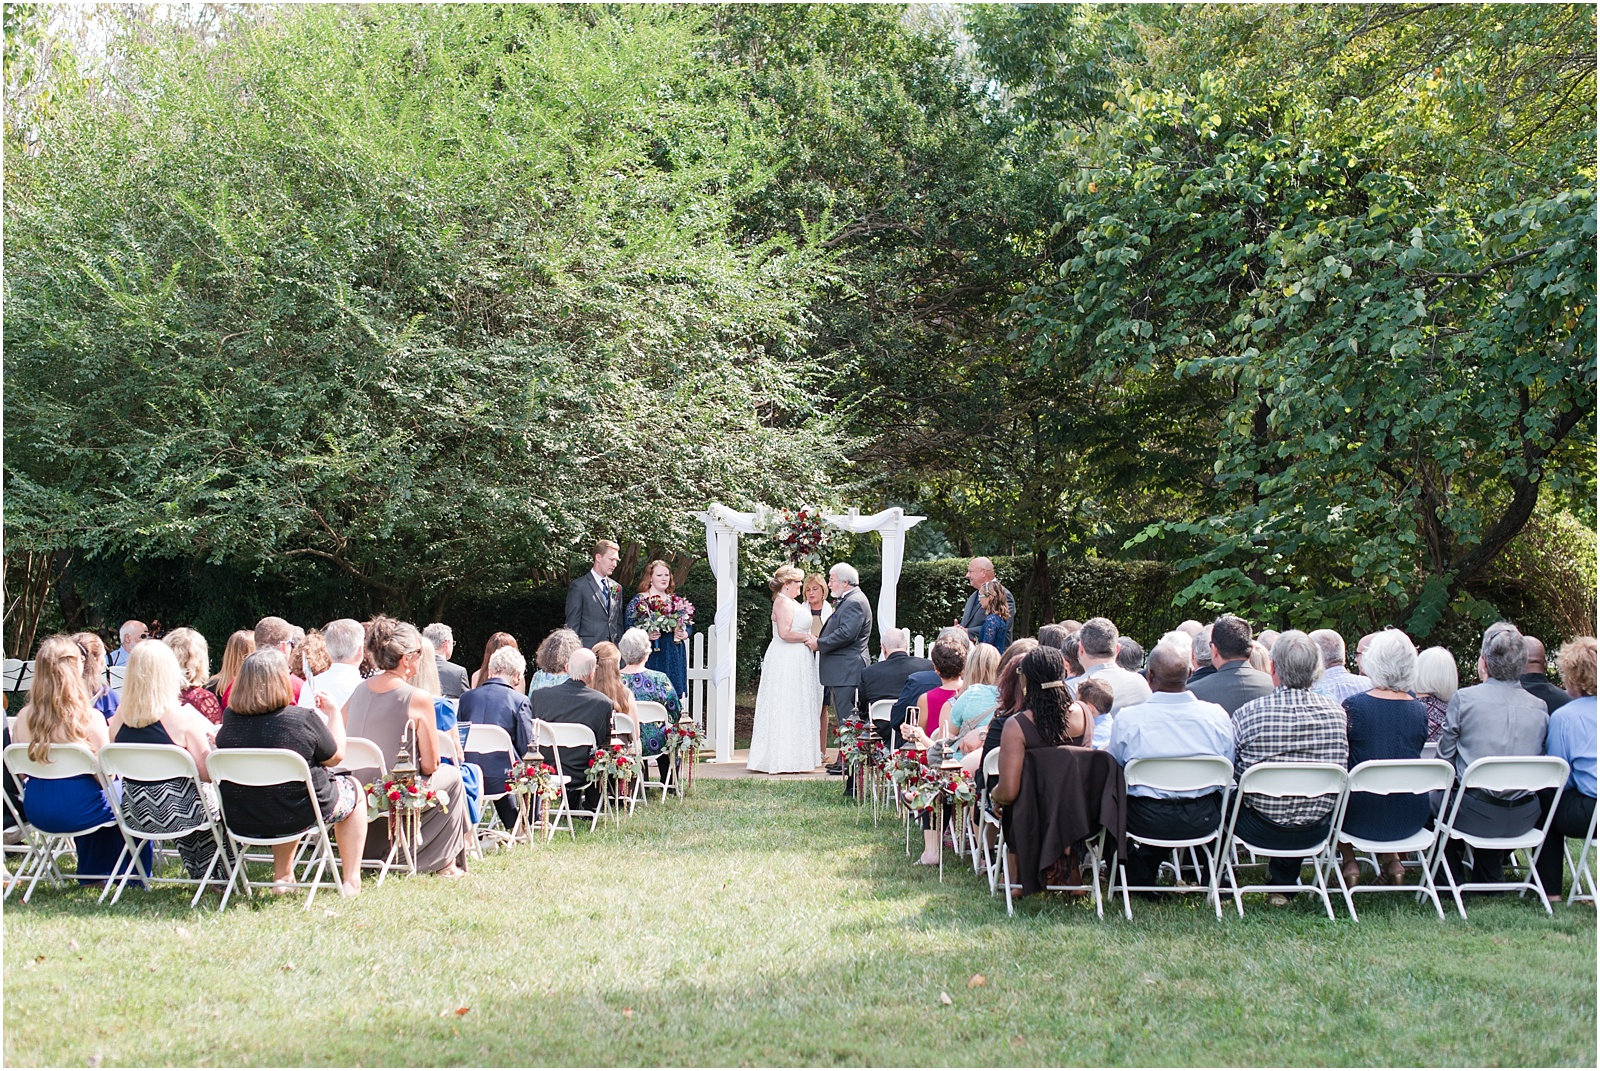 Michelle and Sara Photography, Michelle and Sara weddings, michelle robinson photography, burke manor inn, fall wedding, wedding ceremony